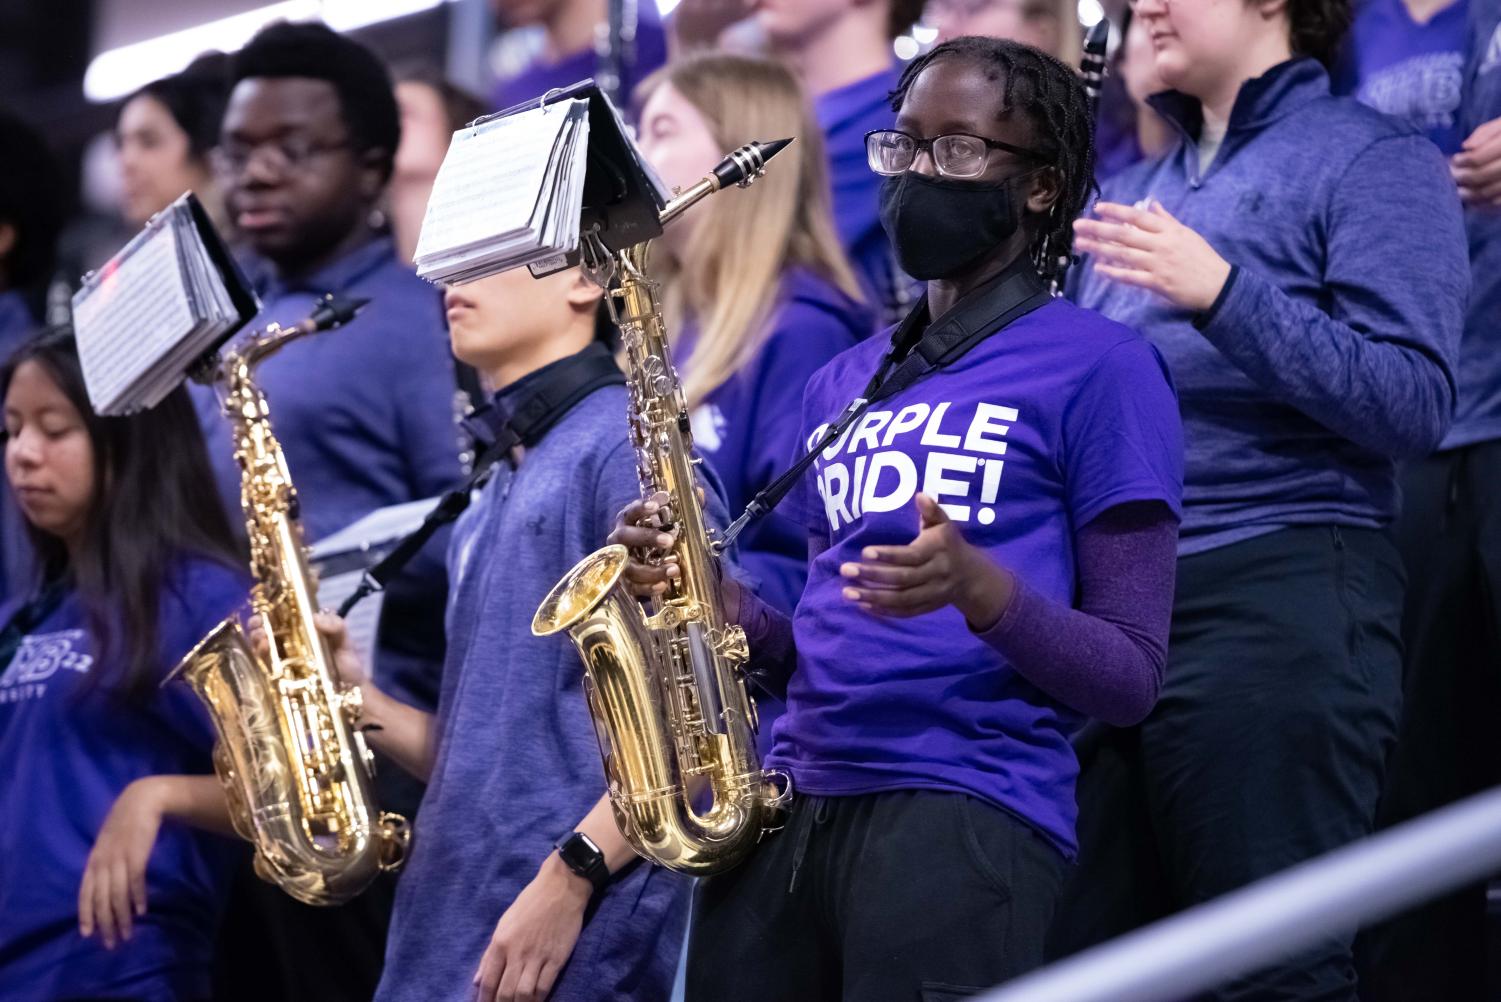 Band players in purple play brass instruments. The person in the foreground with a black mask holds a saxophone.